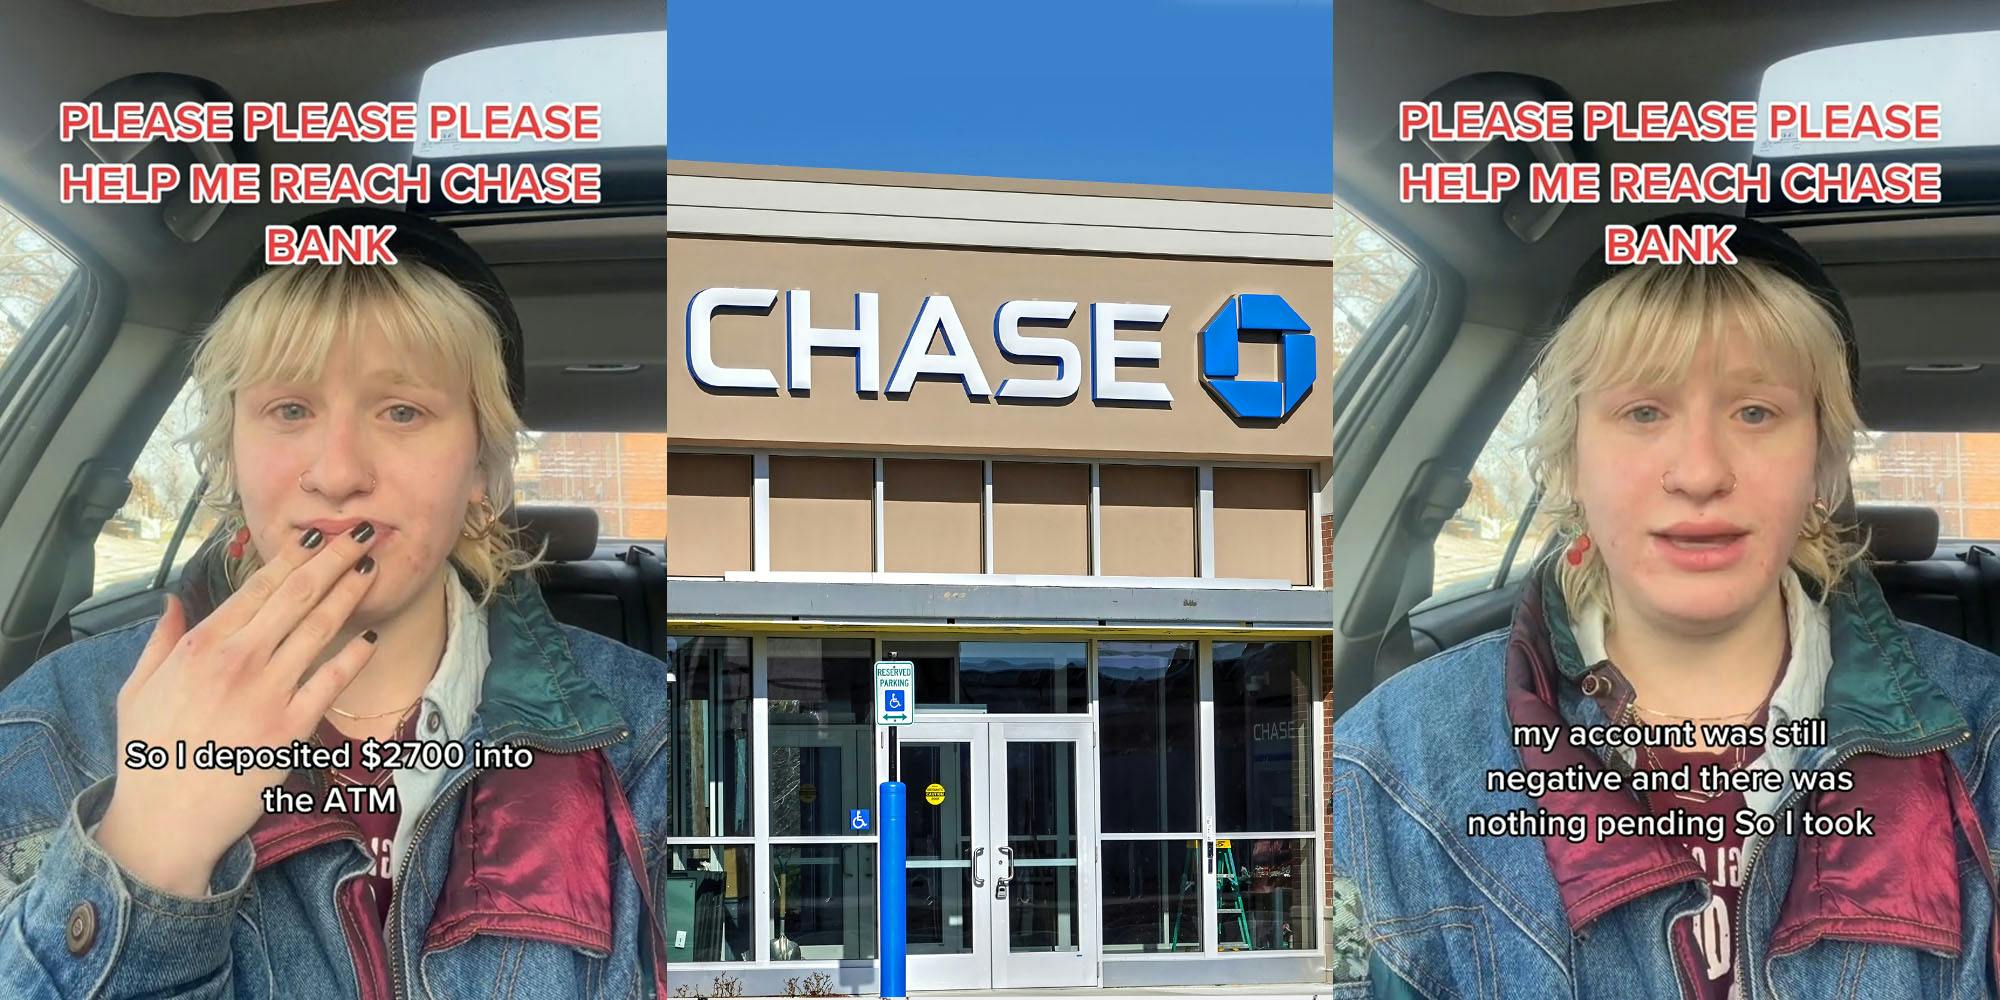 woman in car speaking with hand on mouth caption "PLEASE PLEASE PLEASE HELP ME REACH CHASE BANK" "So I deposited $2700 into the ATM" (l) Chase Bank sign on building with blue sky (c) woman in car speaking caption "PLEASE PLEASE PLEASE HELP ME REACH CHASE BANK" "my account was still negative and there was nothing pending. So I took" (r)